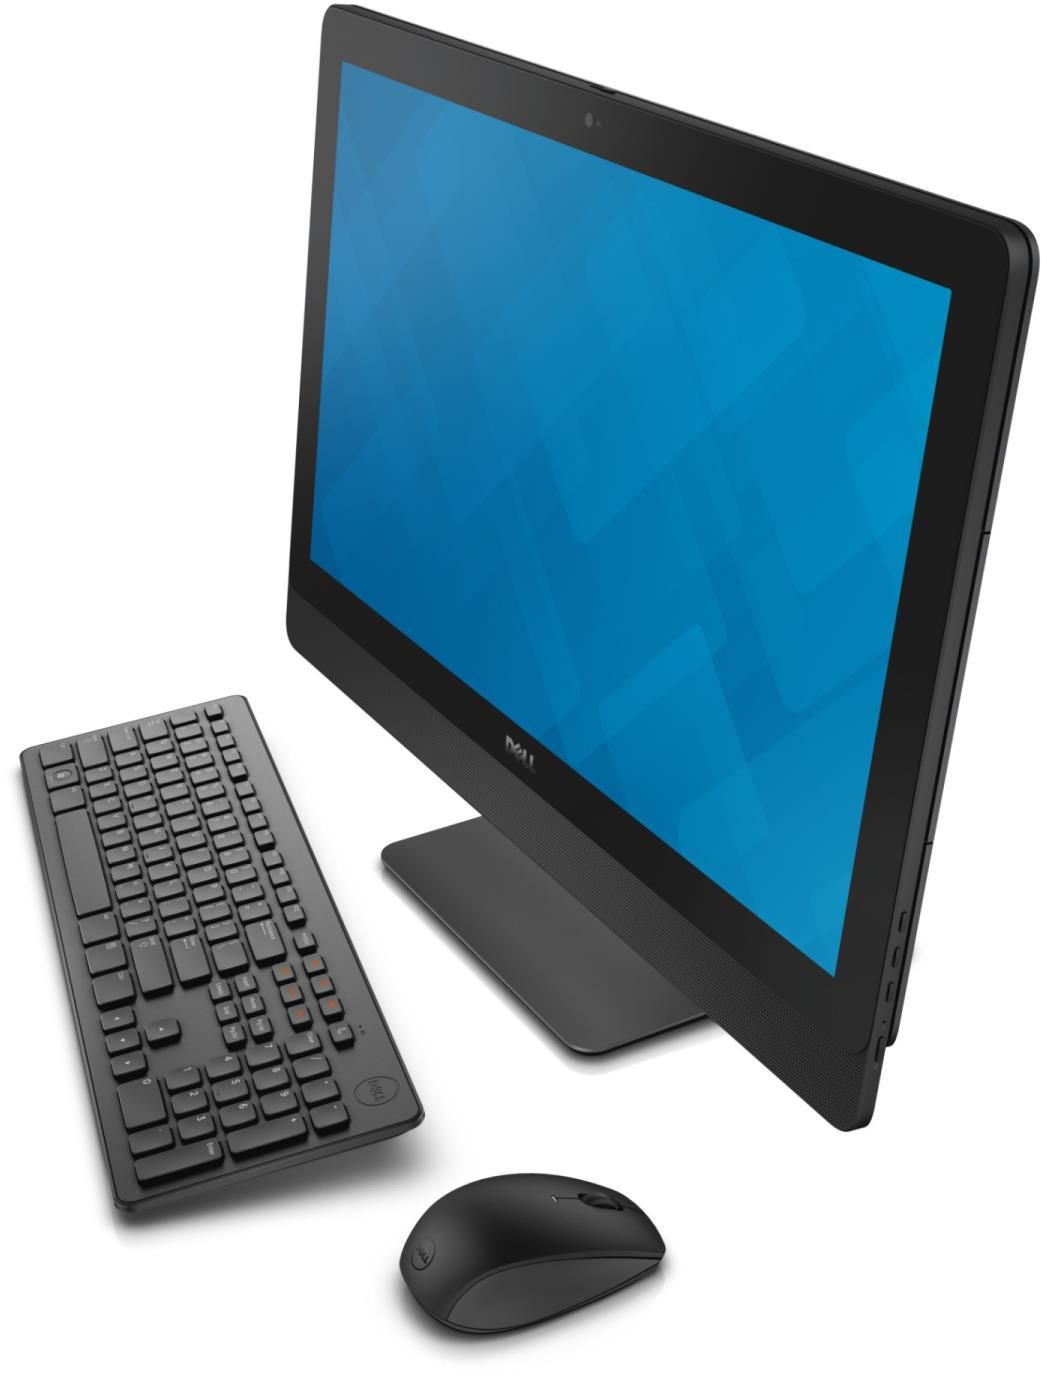 Dell Inspiron 23-5348 AIO 23" TouchSmart Pc Win 8.1 Core i5 4th Generation 8GB, 1TB HDD Wireless & Mouse Keyboard Black